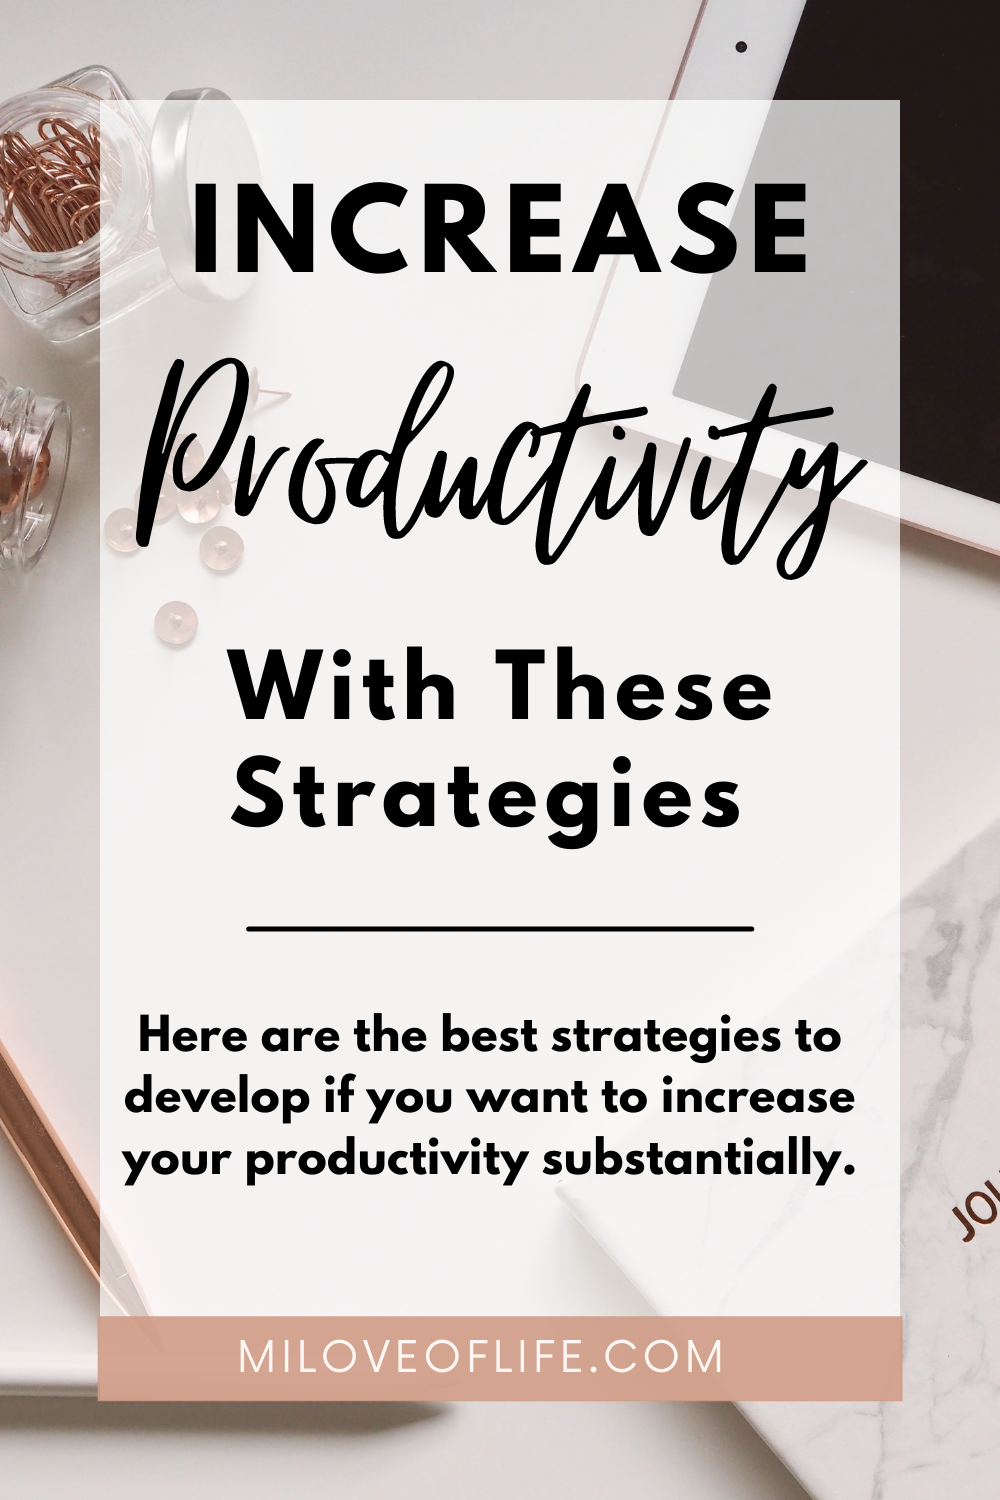 Increase Productivity With These Strategies! At Home, Work & Creative Life.